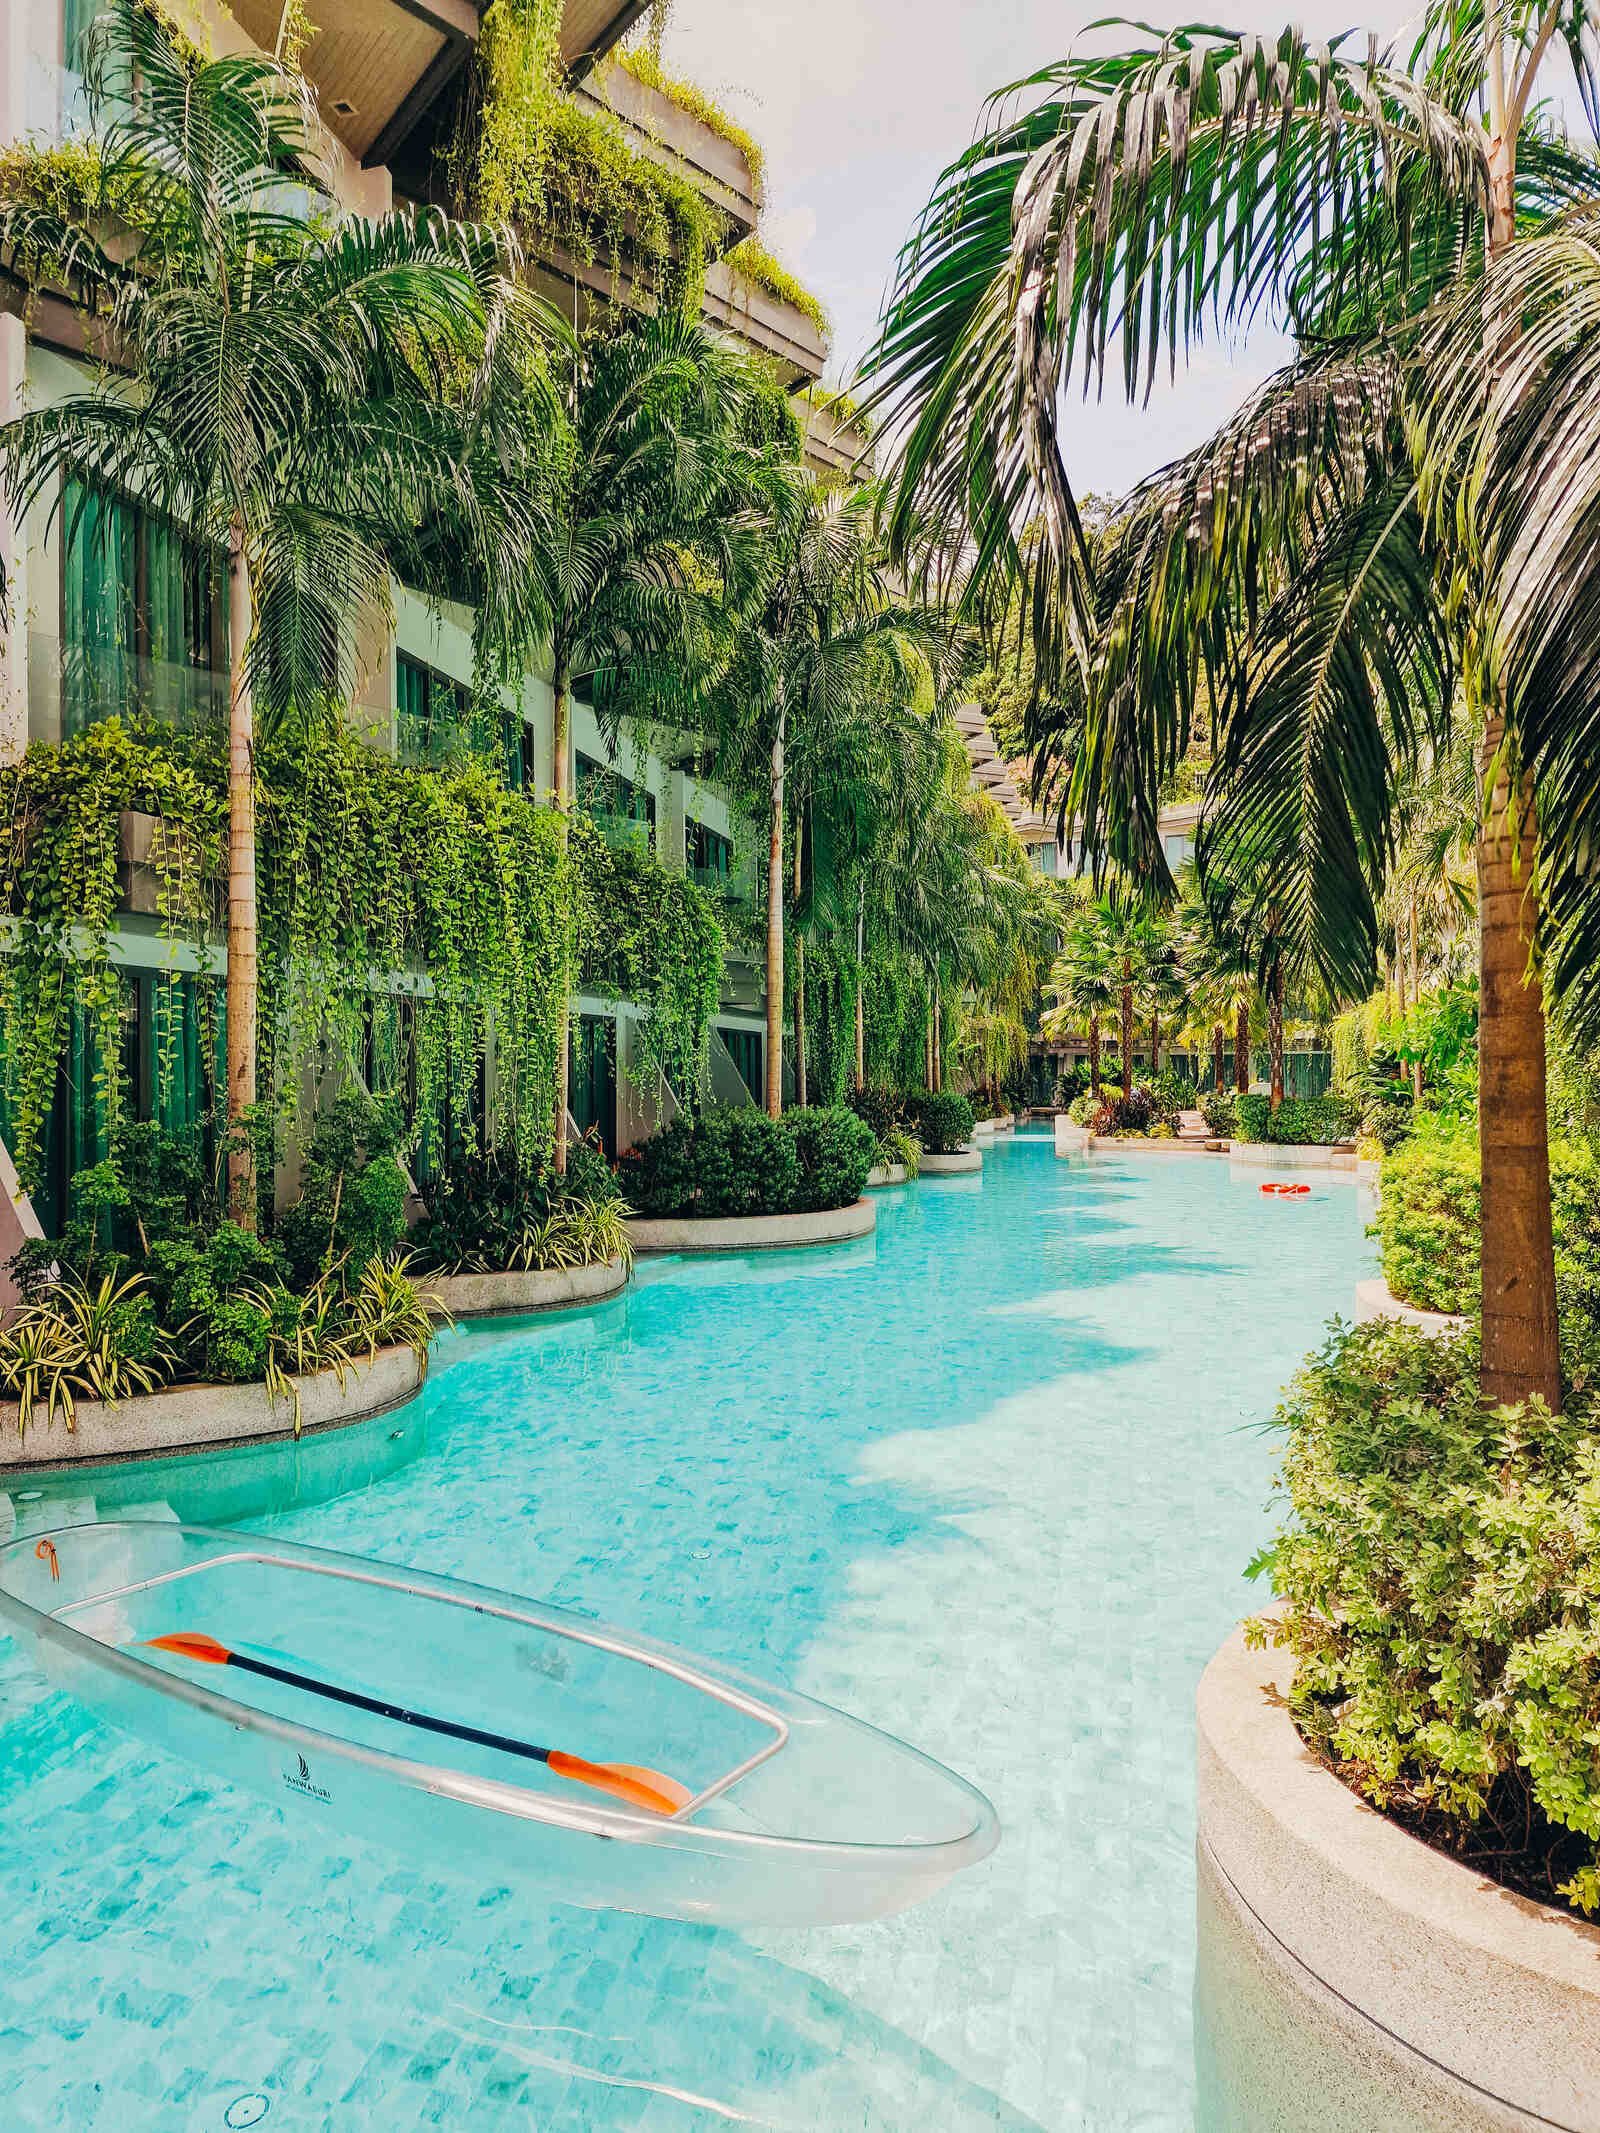 a hotel pool surrounded by greenery and palm trees with a glass bottom canoe floating empty in the pool